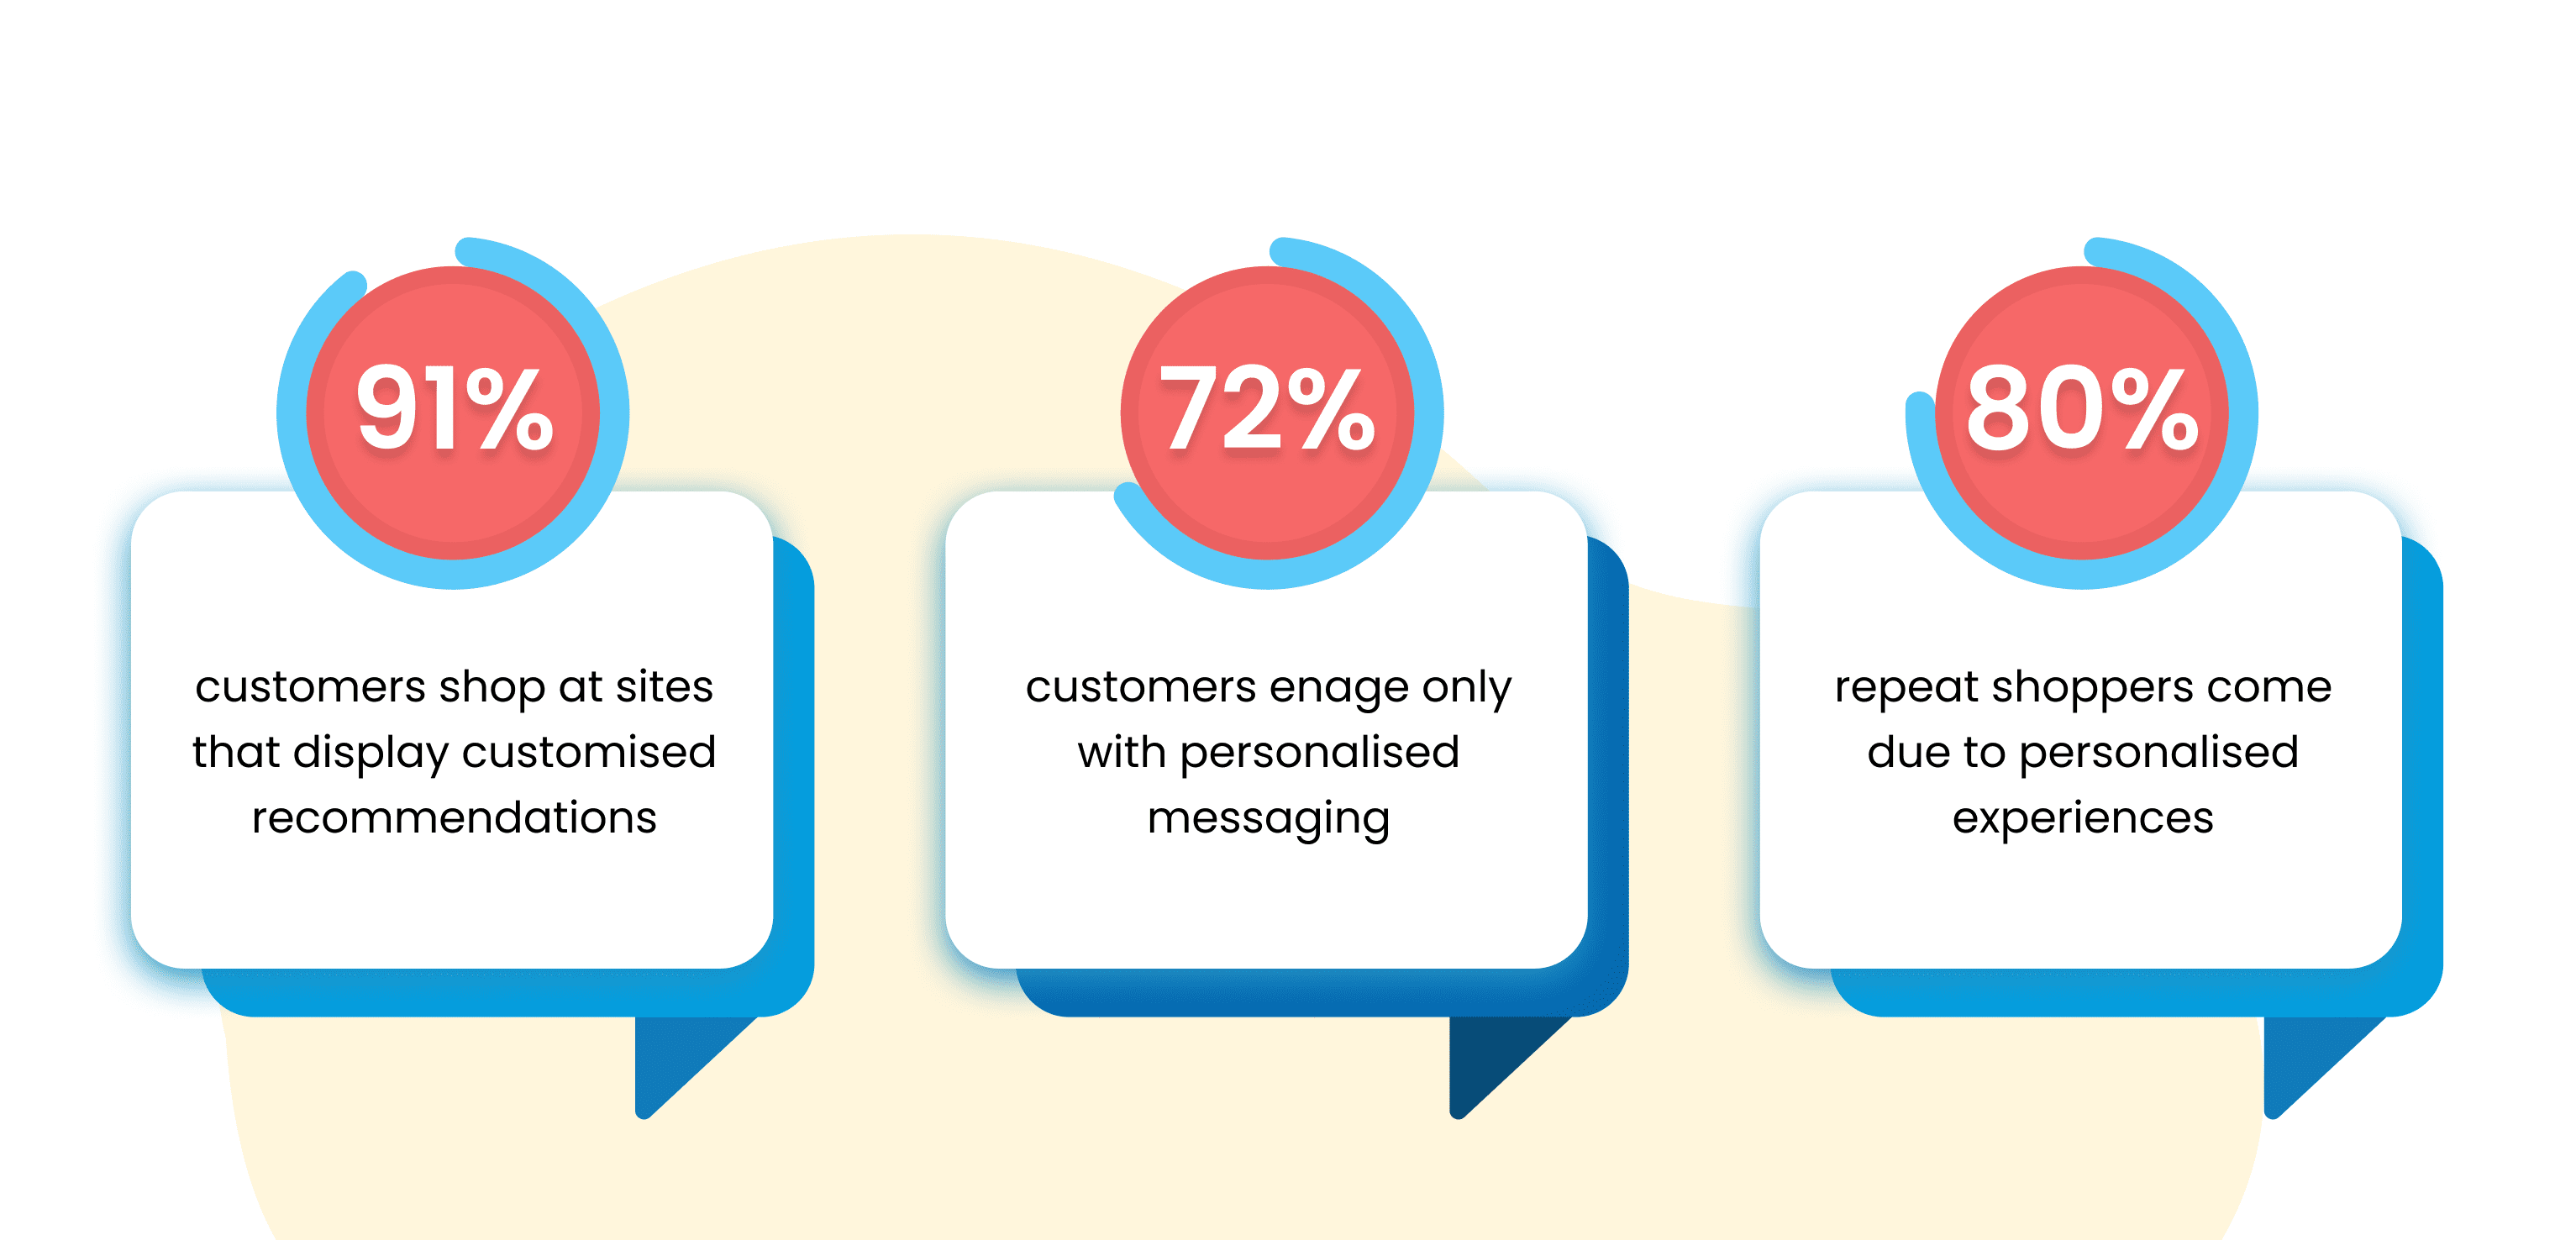 picture showing statistics related to personalized customer service